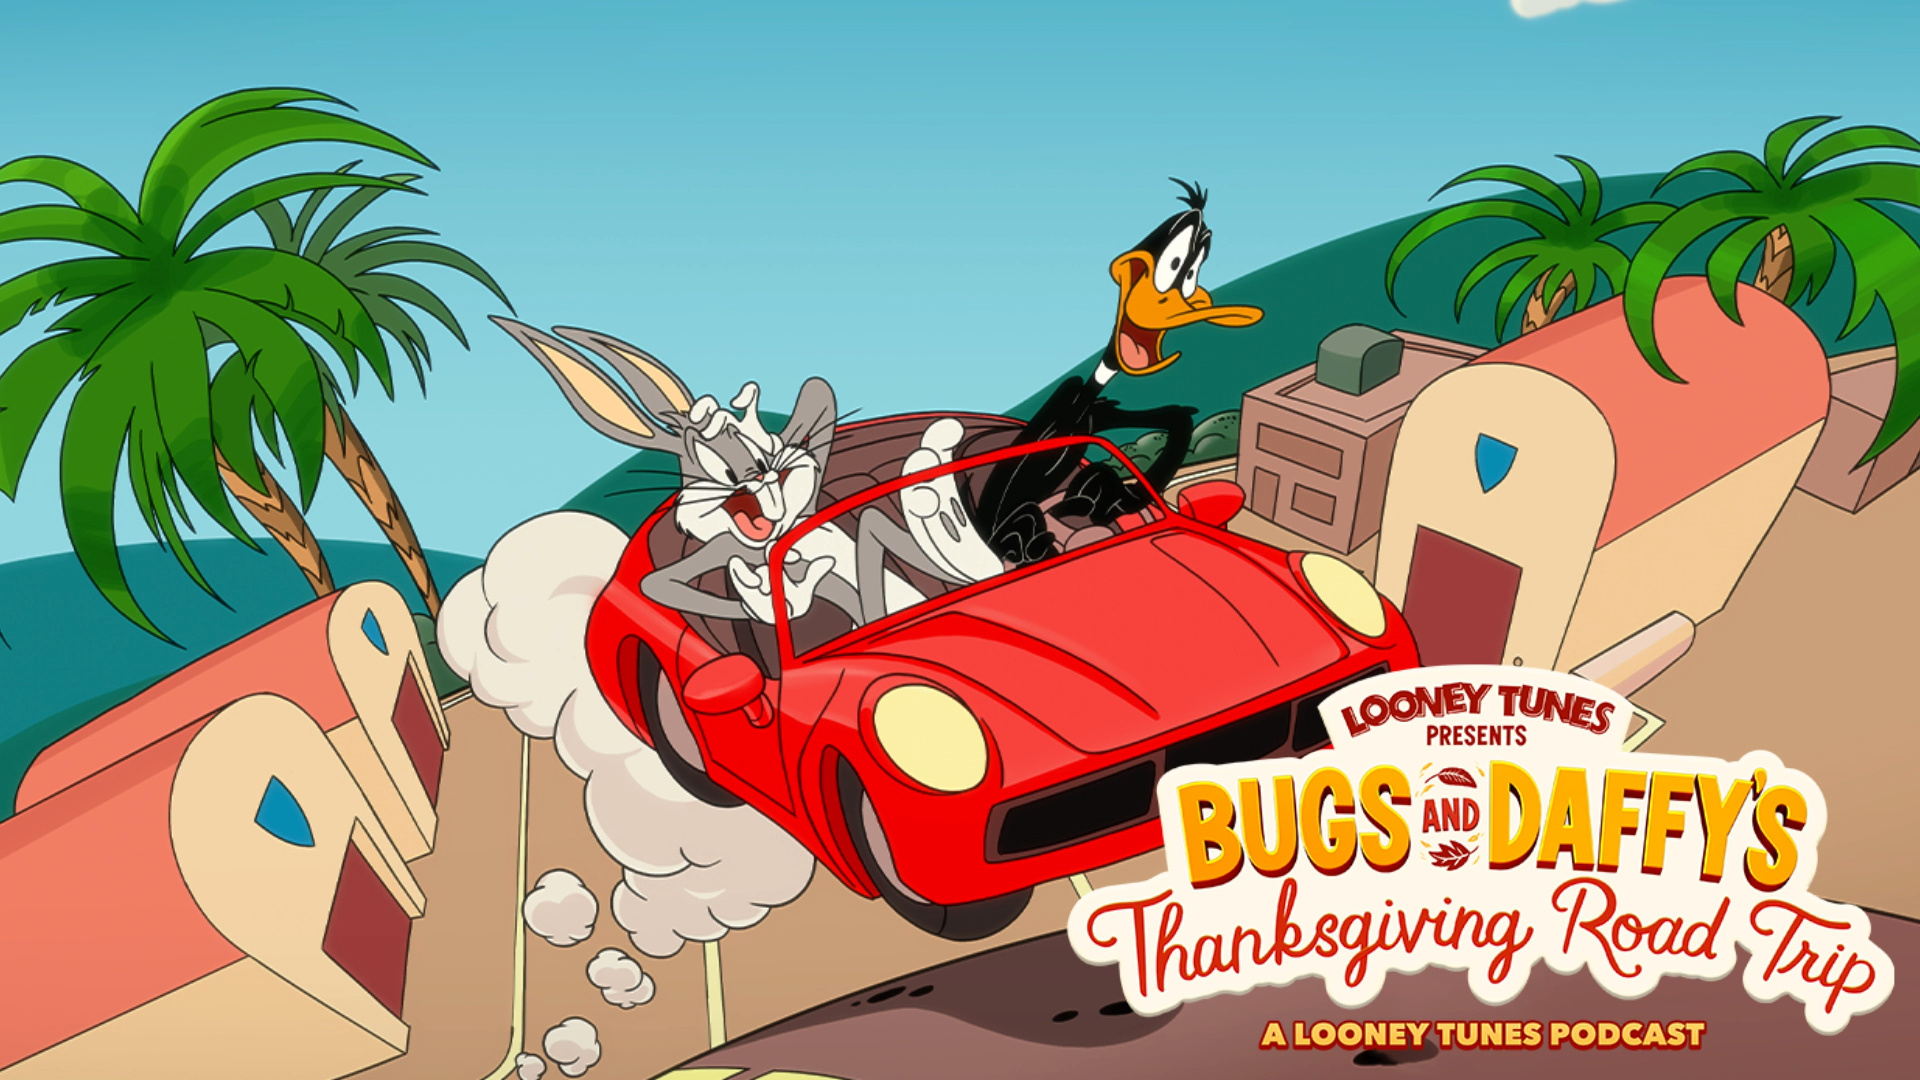 Bugs Bunny, Daffy Duck, Looney Tunes, Scripted podcast series, 1920x1080 Full HD Desktop